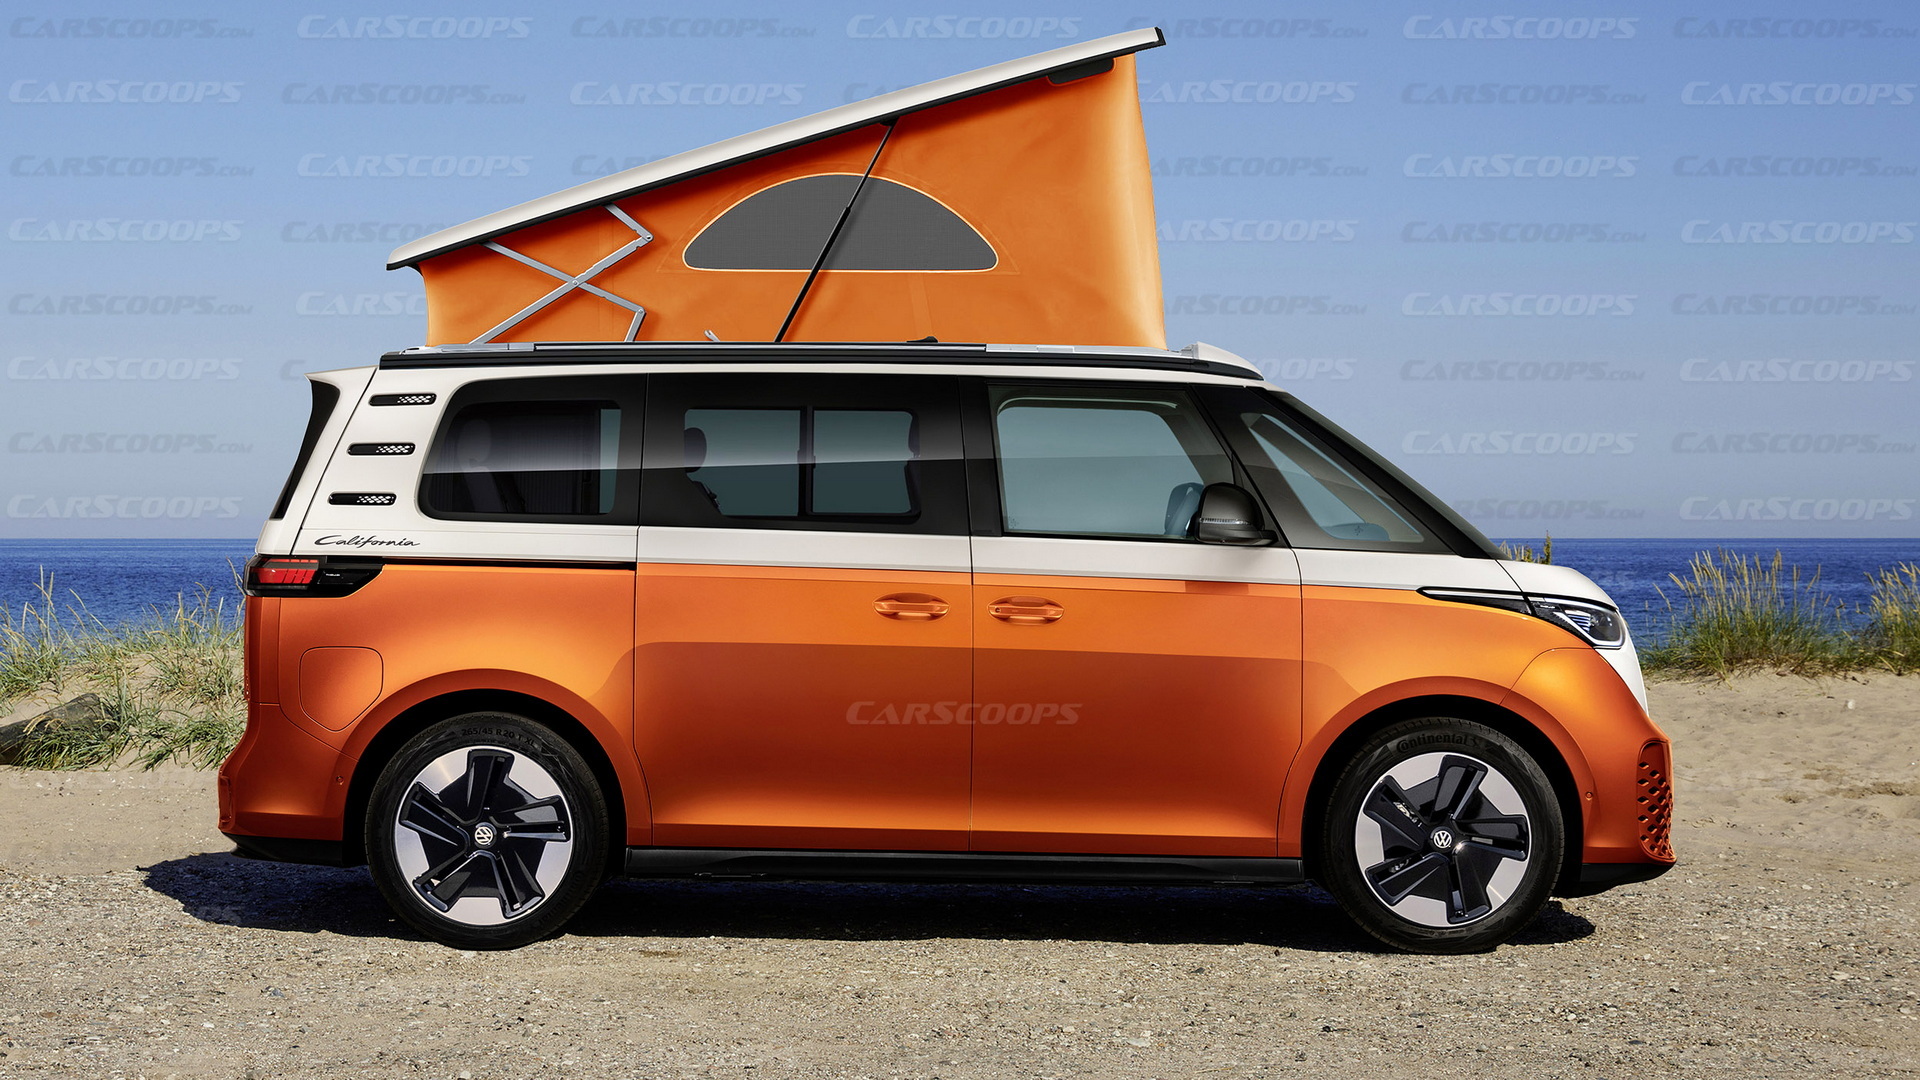 2026 Vw Id California The Buzz Is Coming To Electrify Your Camping ...